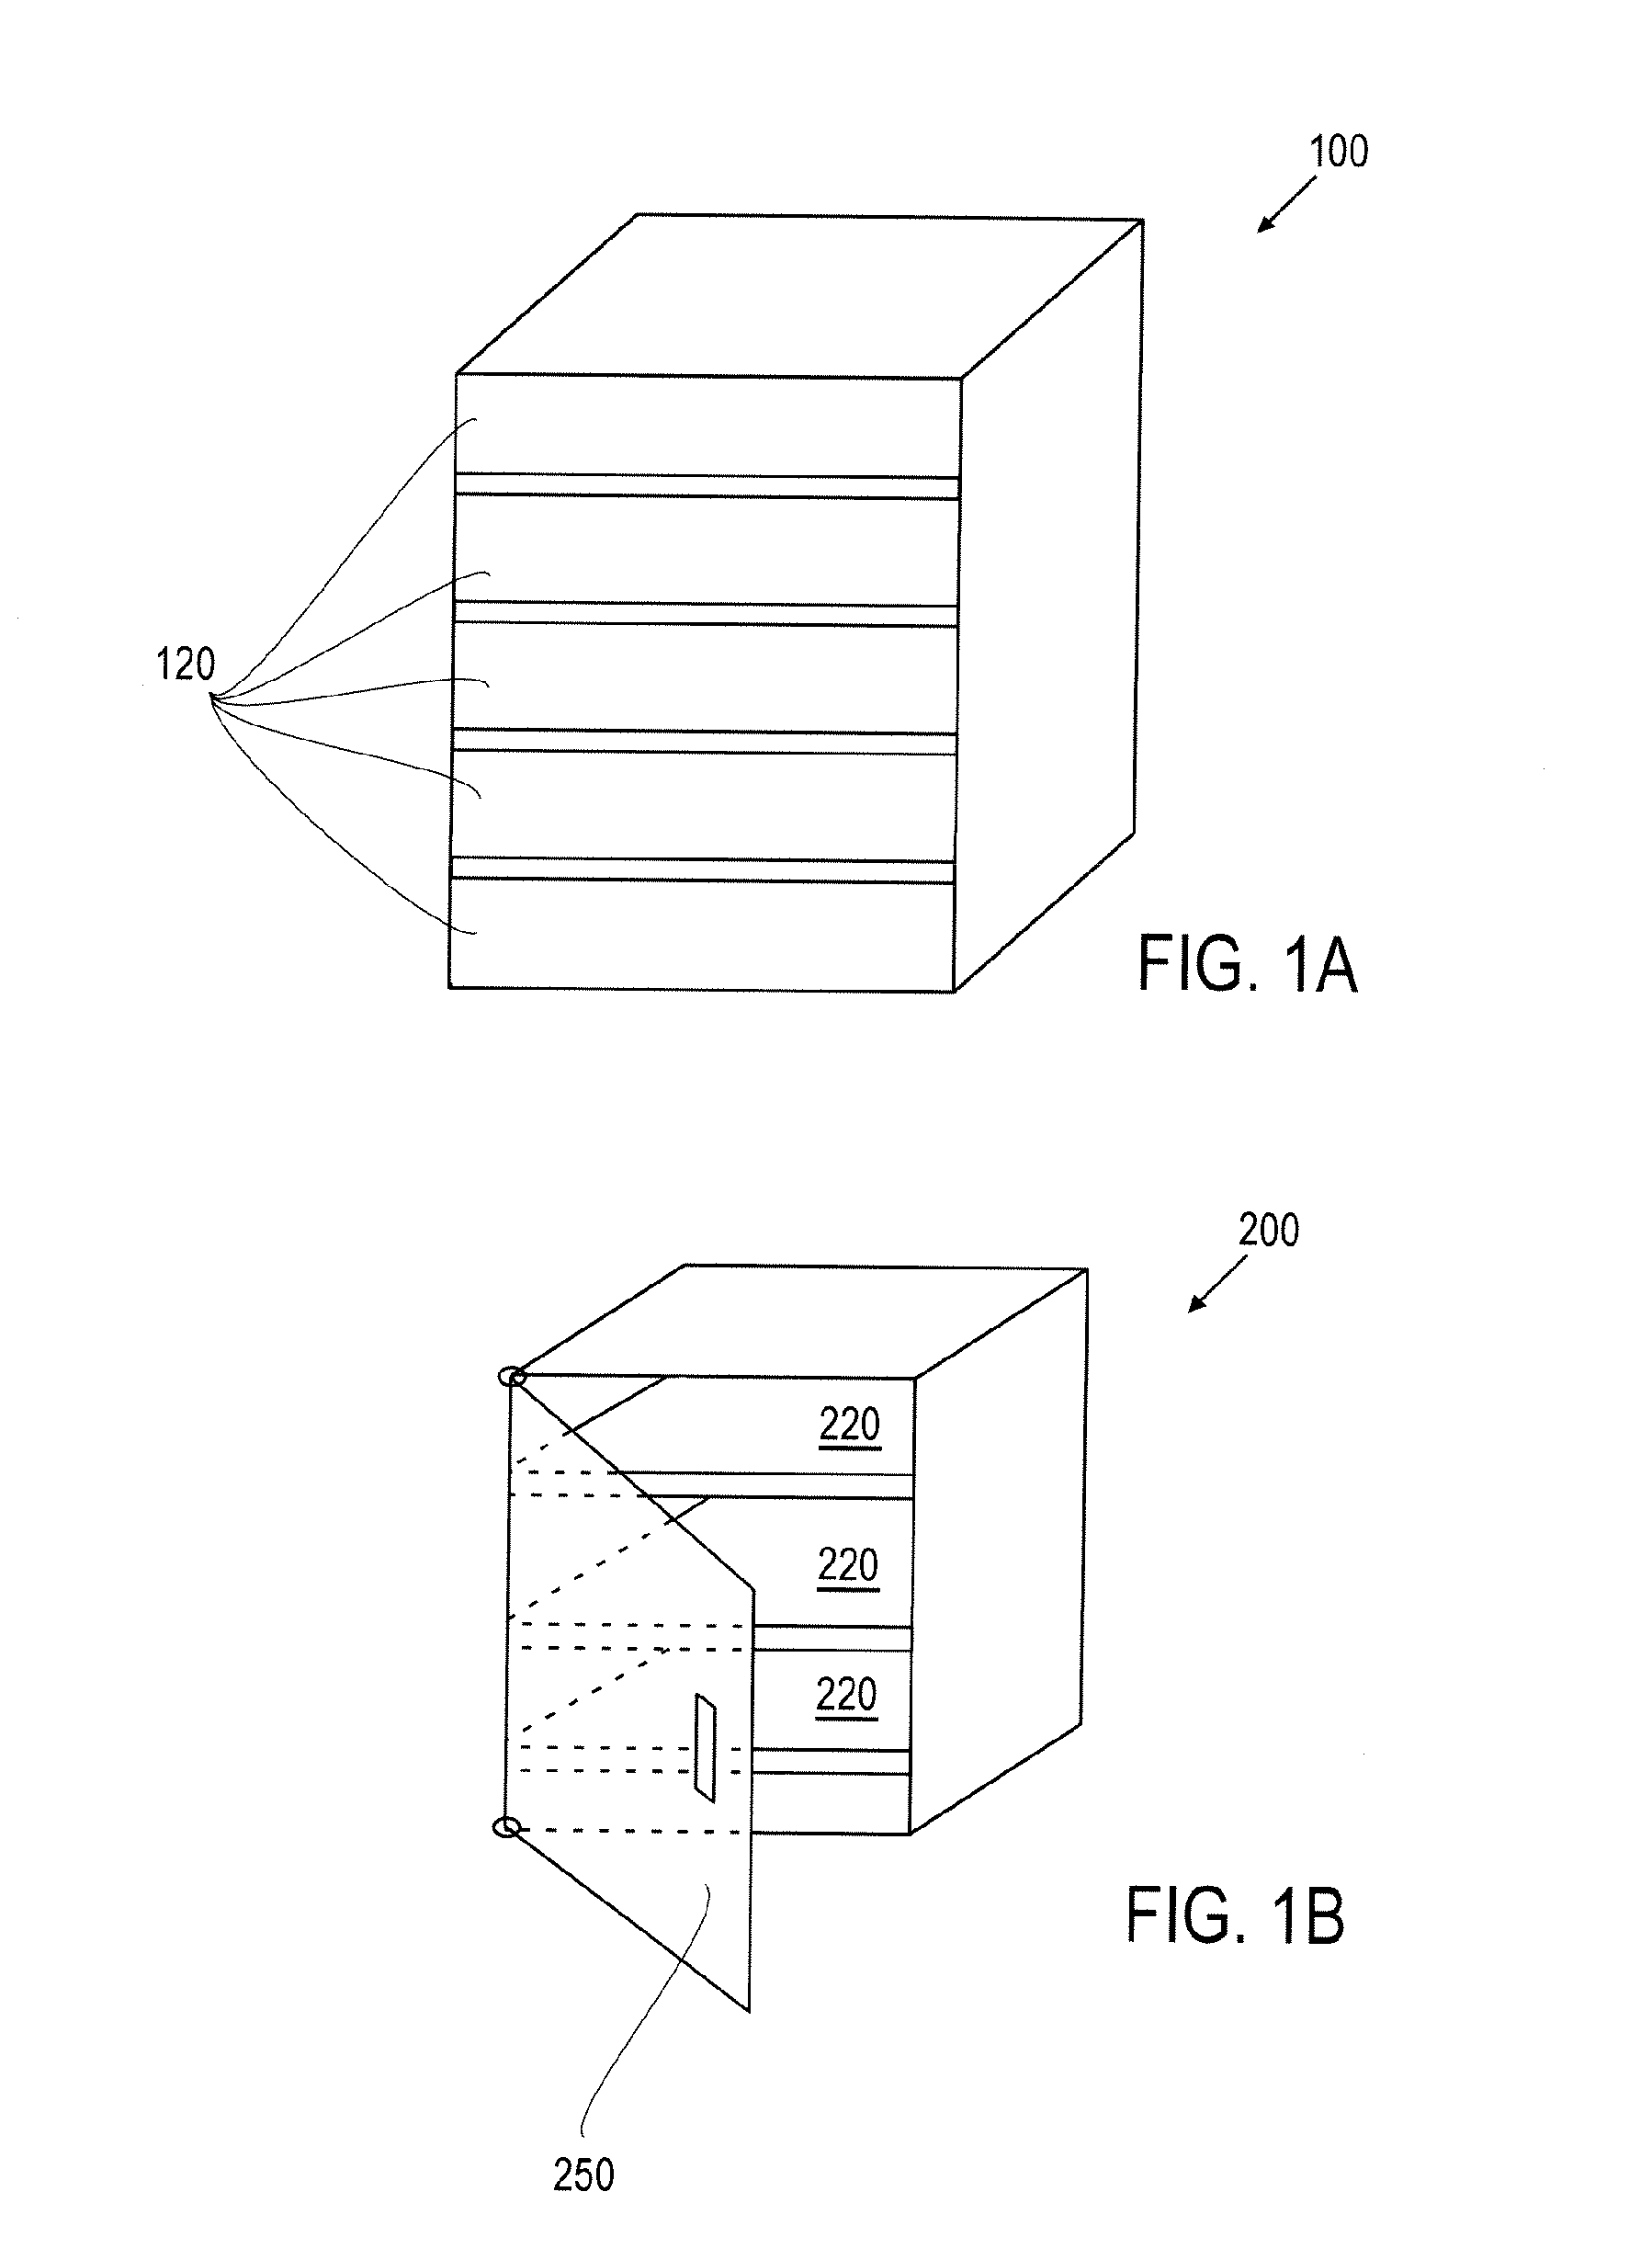 Monitoring removal and replacement of tools within an inventory control system